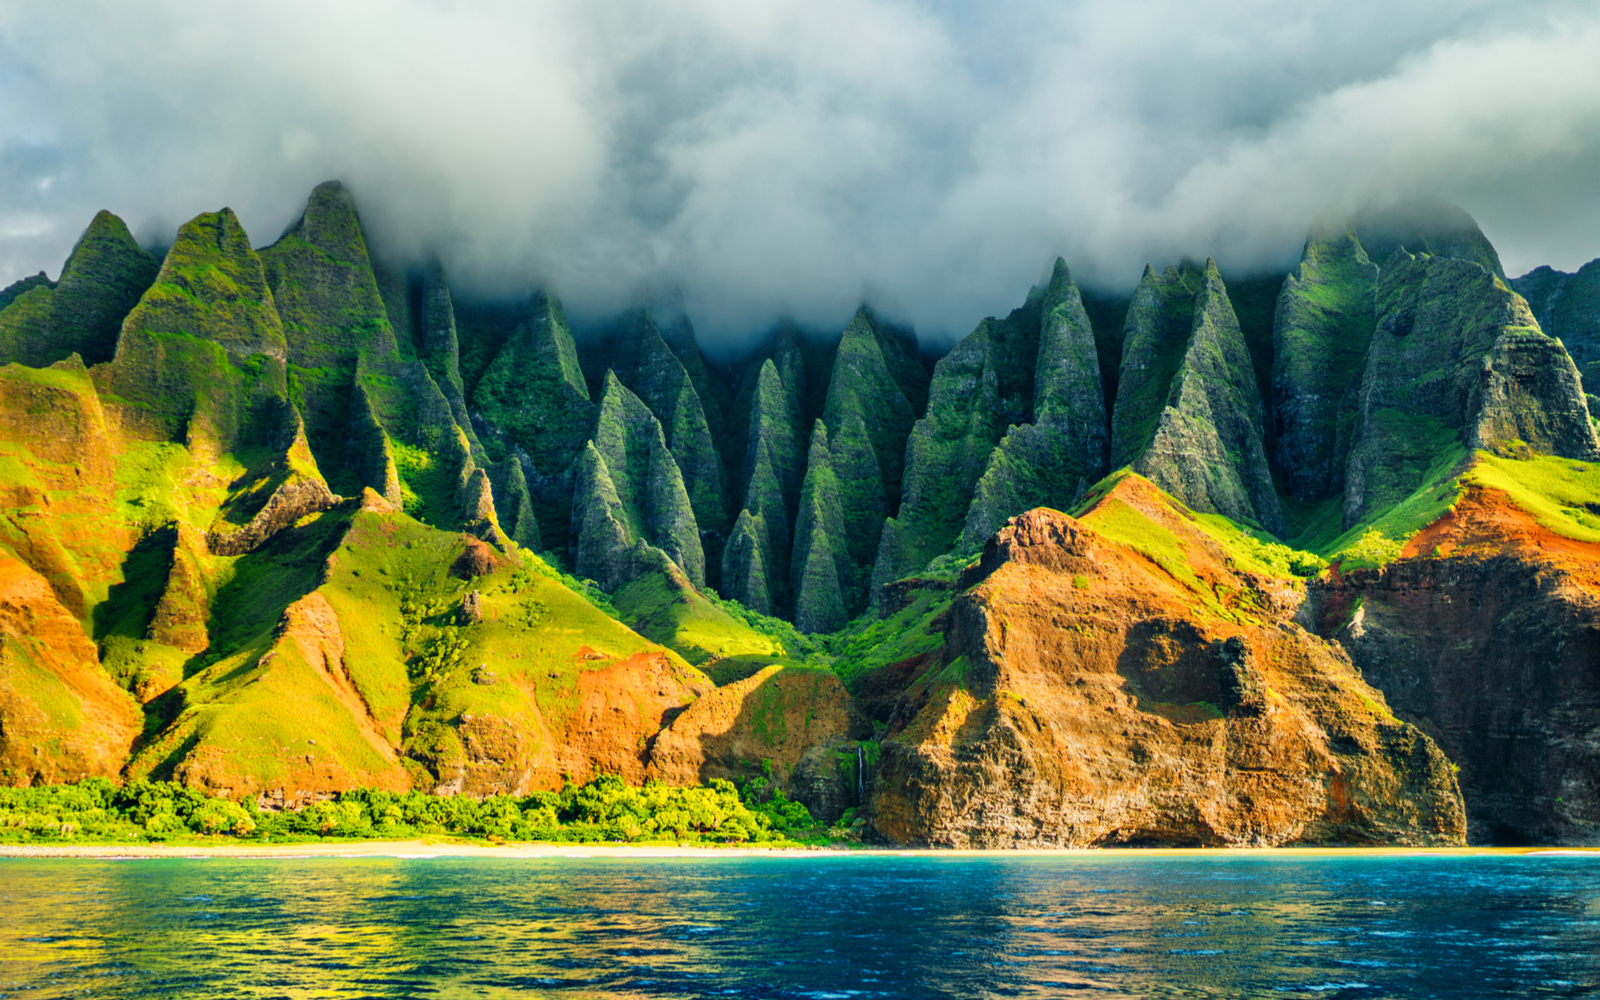 Best Time to Visit Kauai | When to Go & Travel Tips